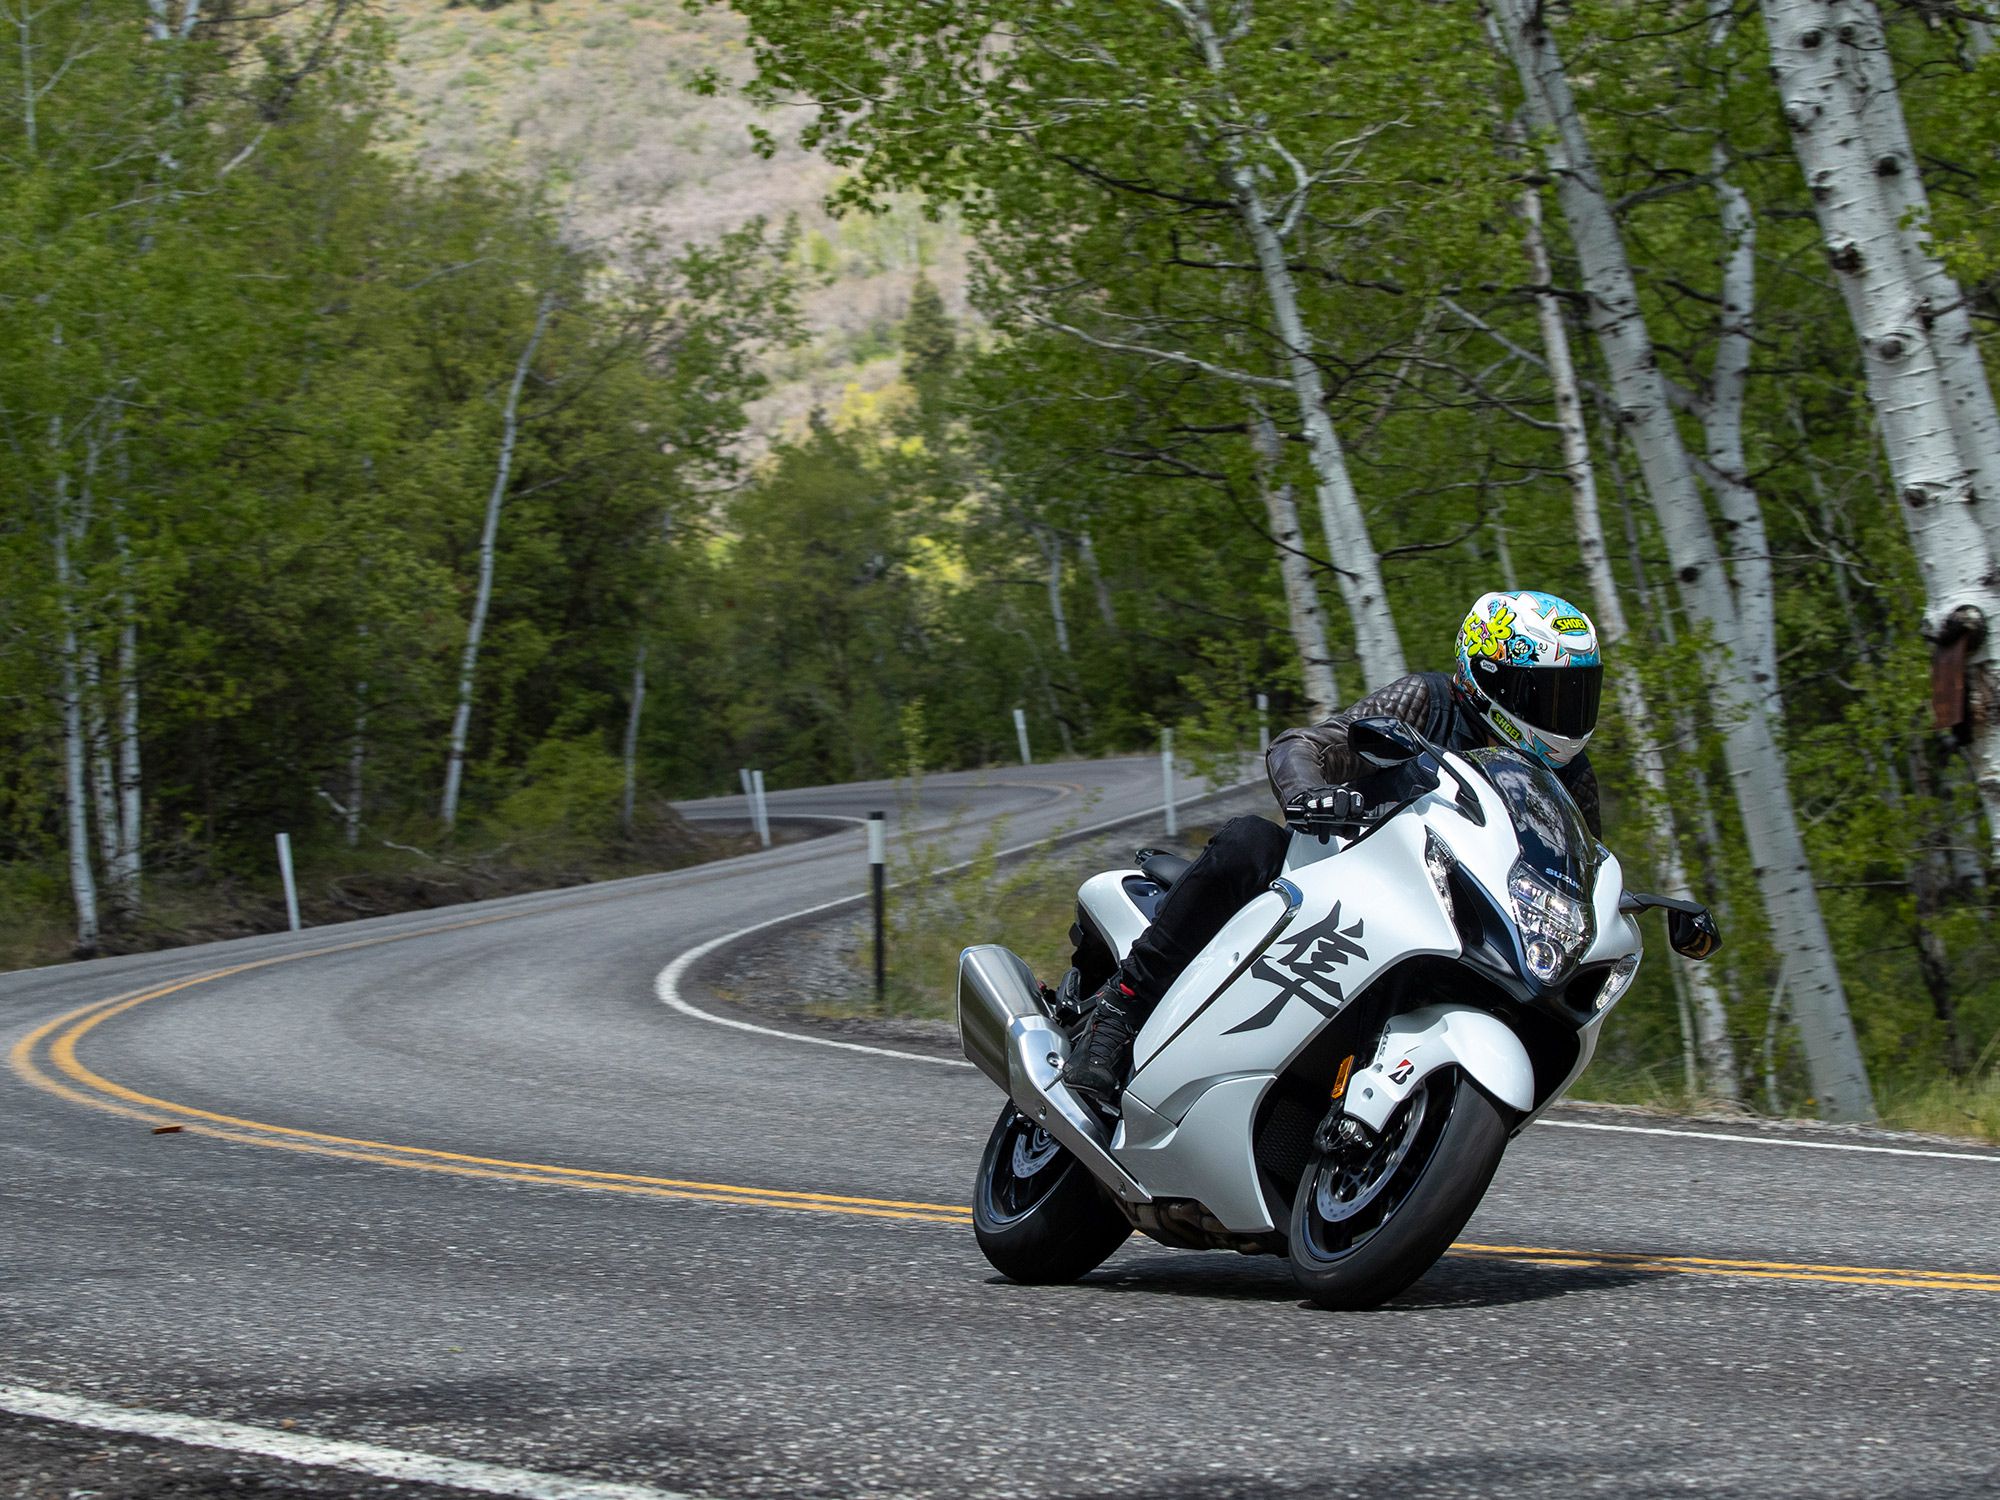 We’re always impressed by how well Suzuki’s Hayabusa handles for a nearly 600-pound sportbike. Its handling is even more effortless for 2022.